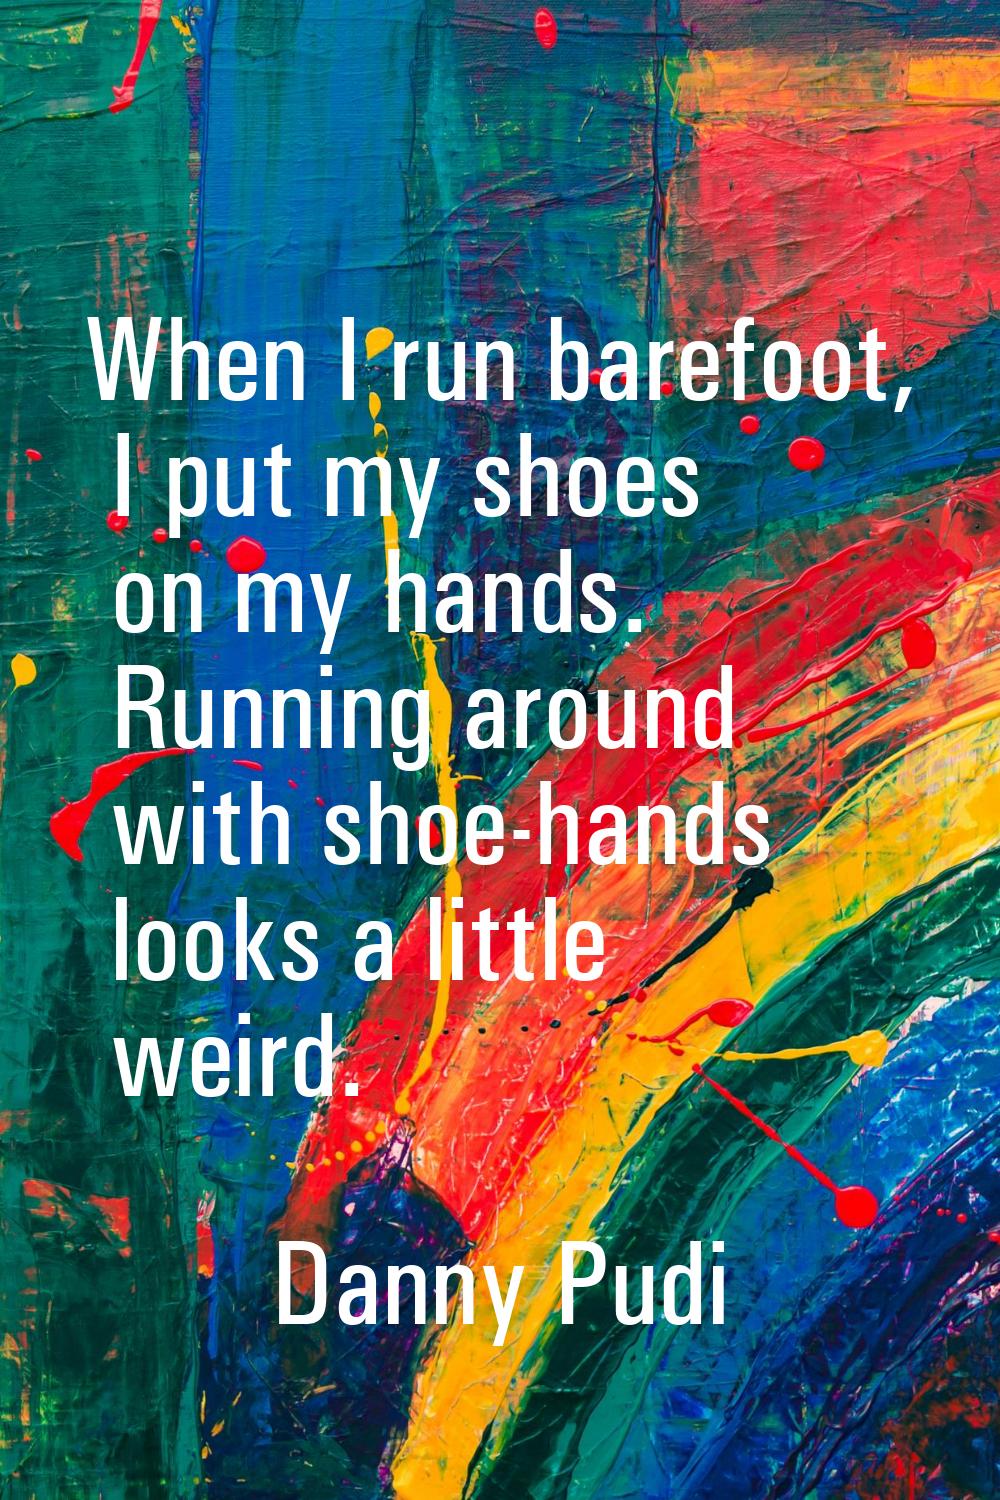 When I run barefoot, I put my shoes on my hands. Running around with shoe-hands looks a little weir